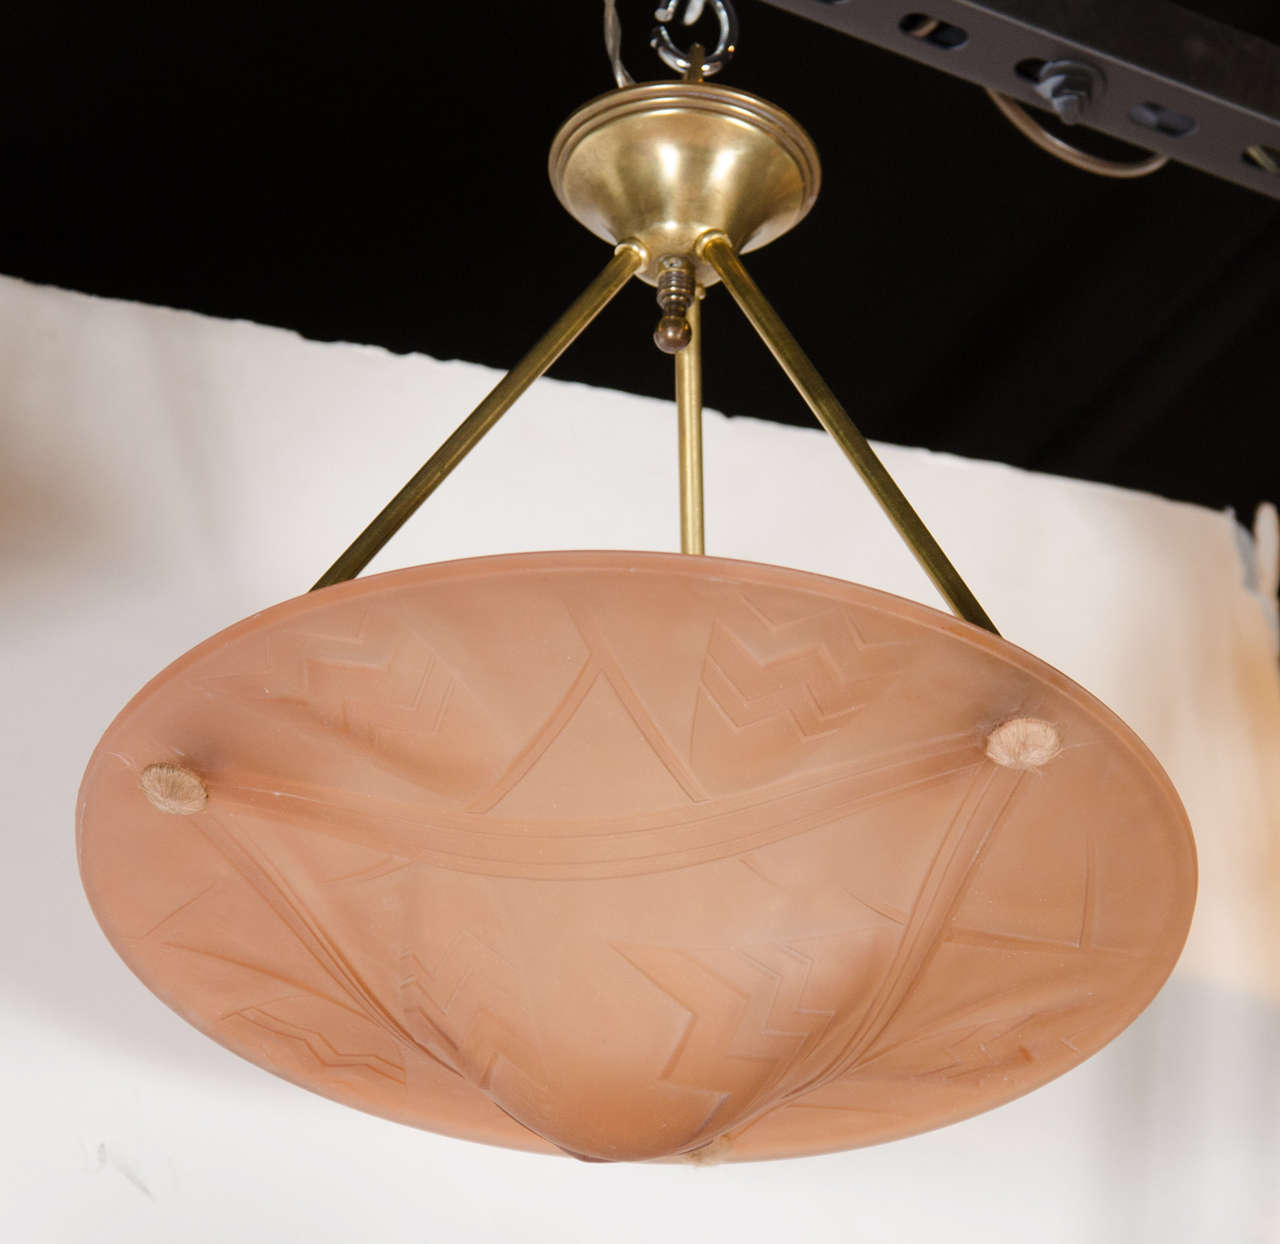 Art Deco pendant chandelier signed Degue. This exquisite pendant chandelier features a hand blown glass dome in blush copper tones with stylized geometric design that is hung from three antique brass rod supports that lead up the antique brass